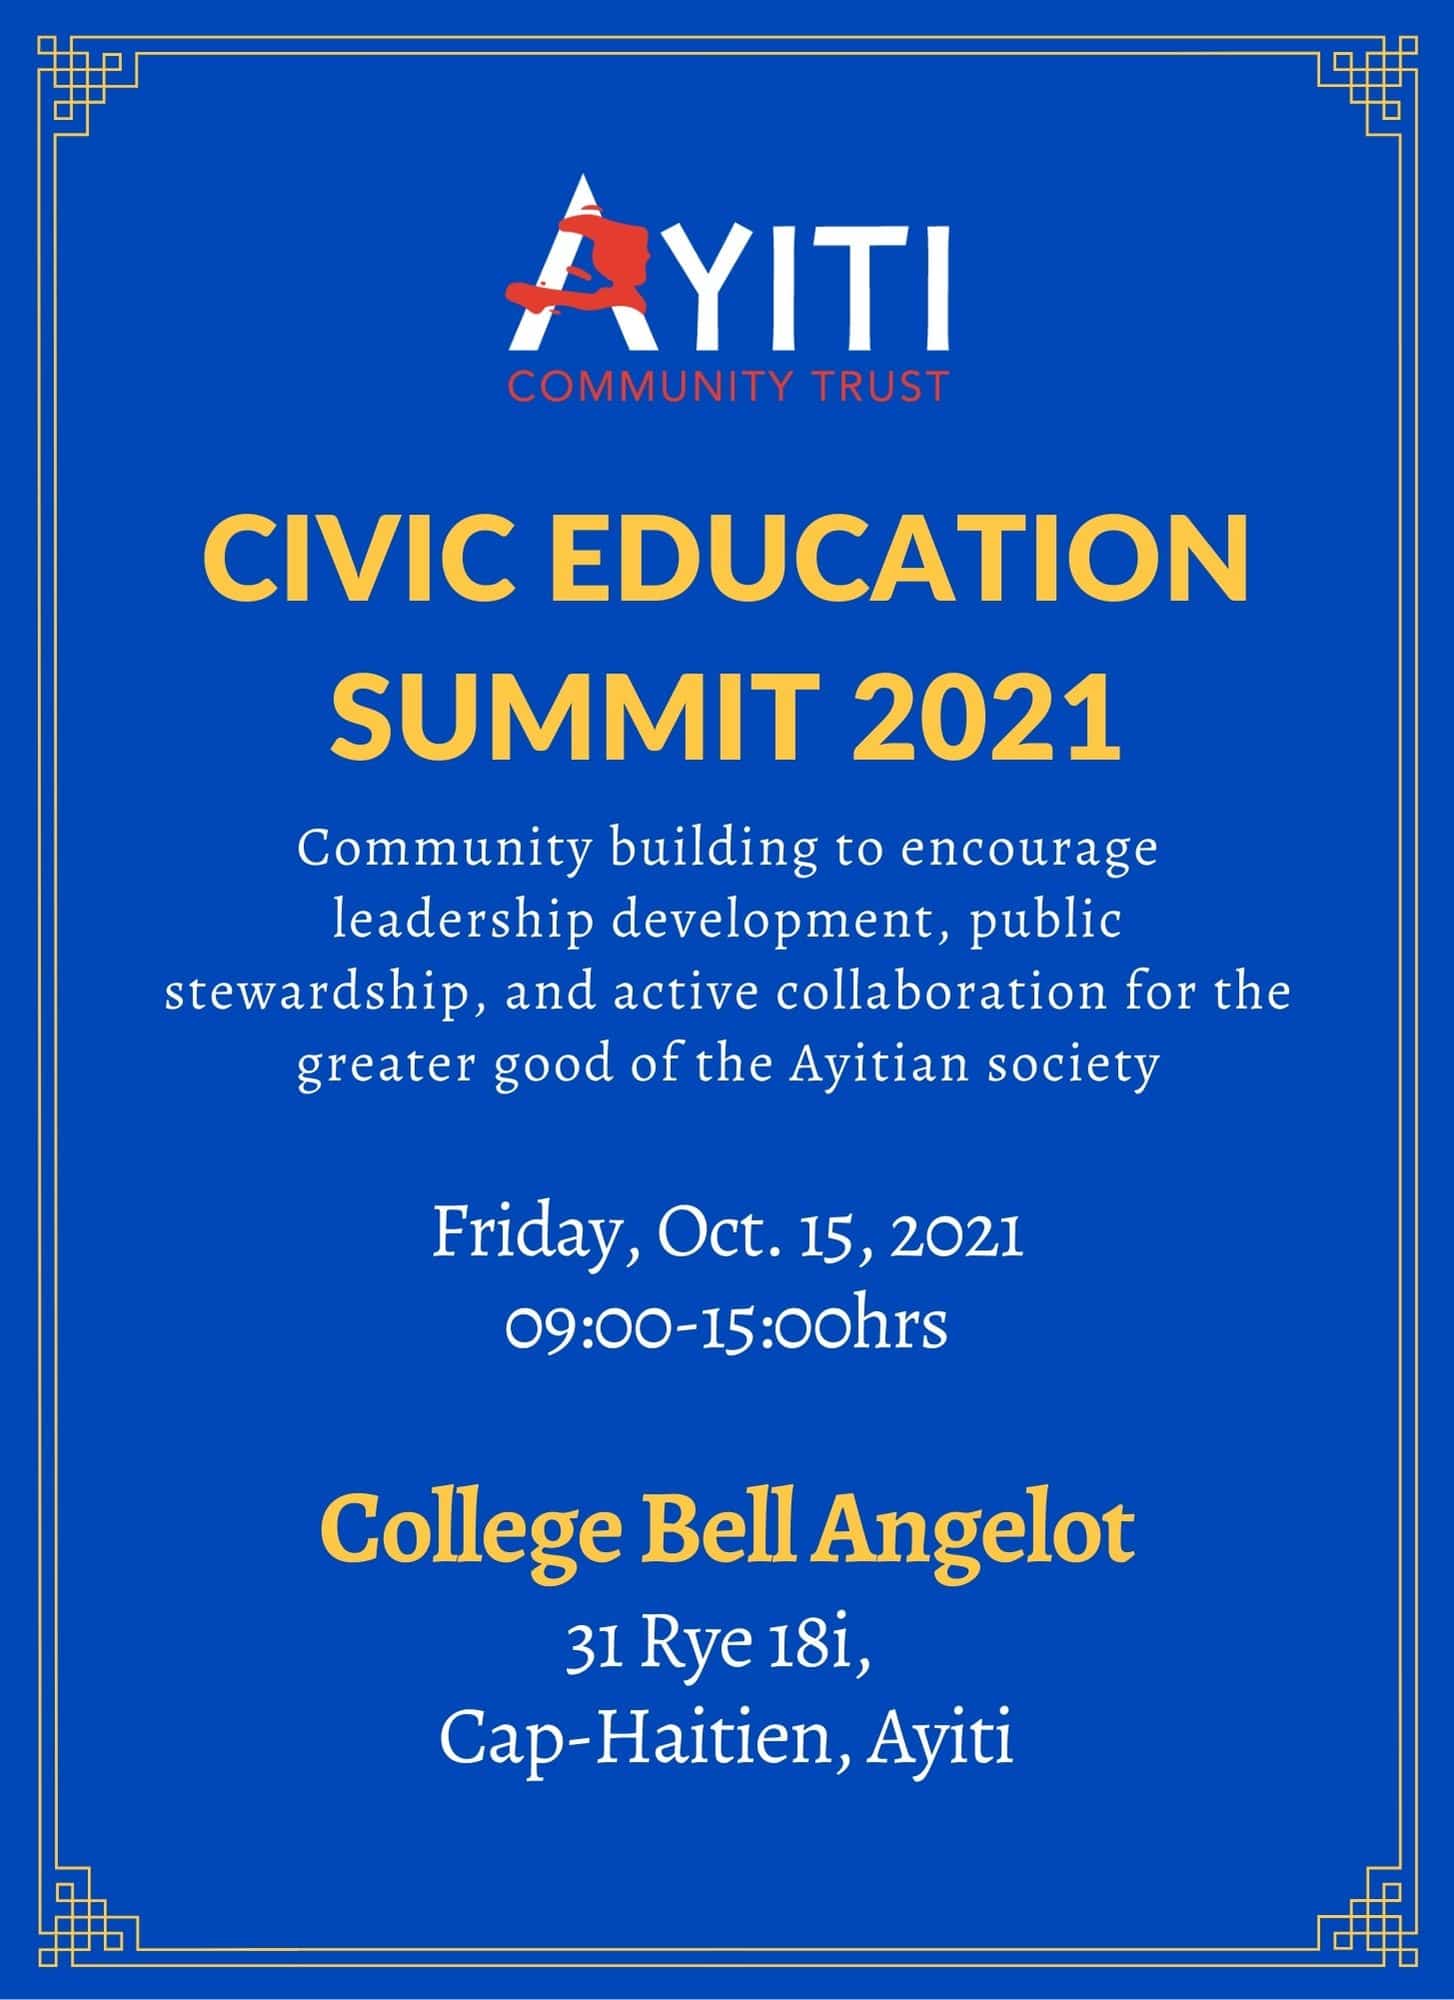 CIVIC EDUCATION SUMMIT Save The Date_09-16--21 (11 x 8 in) (8 x 11 in)